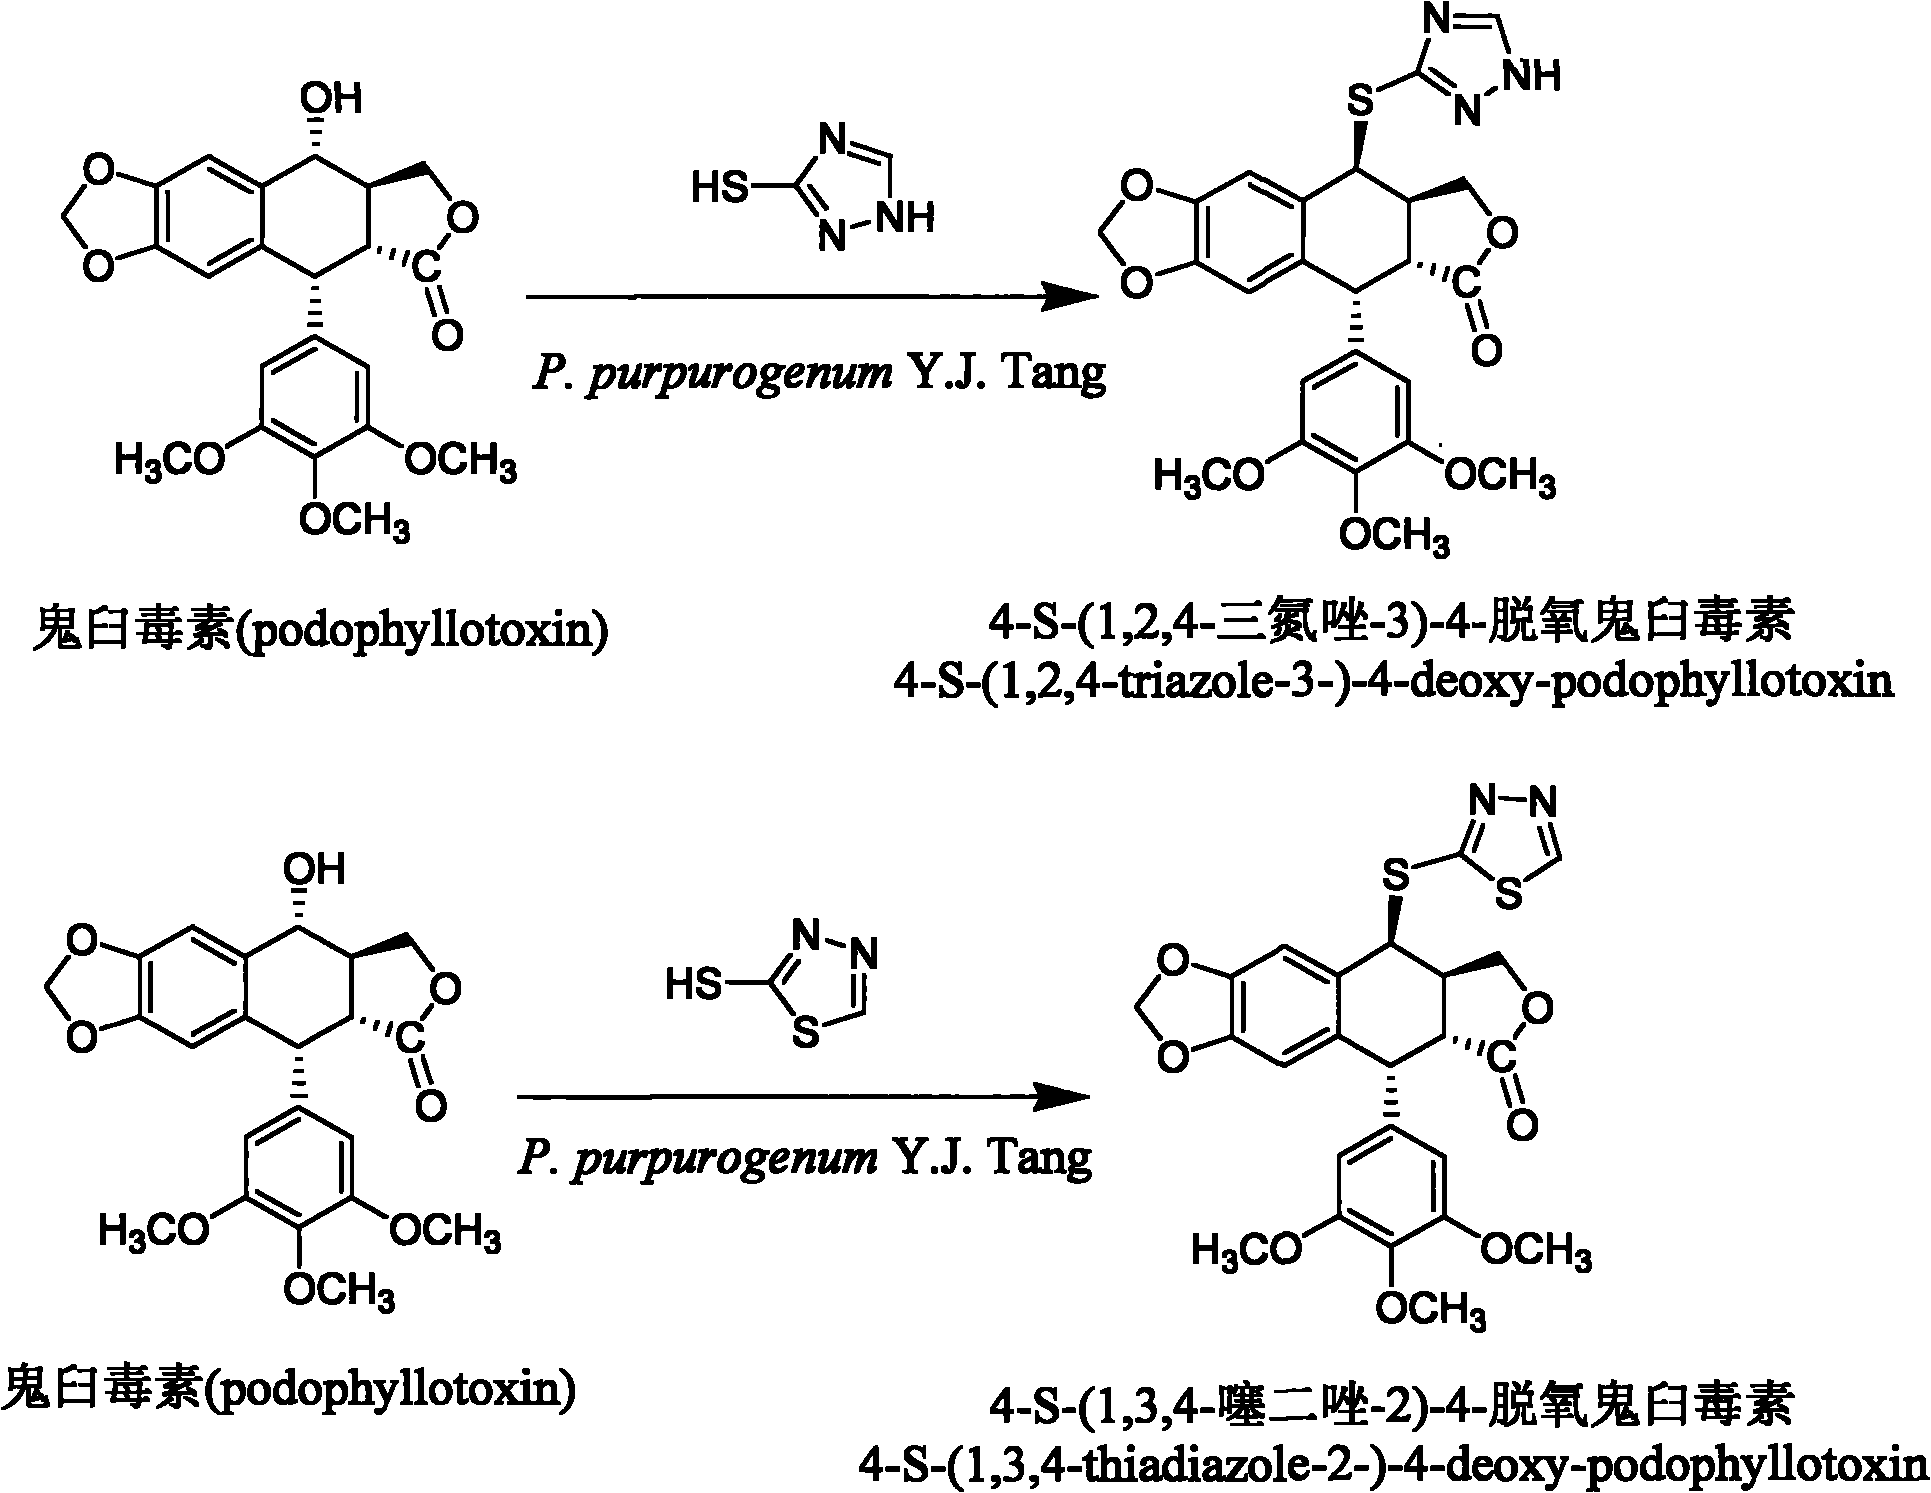 Sulfur-substituted podophyllin derivatives and their biotransformation and separation and purification methods